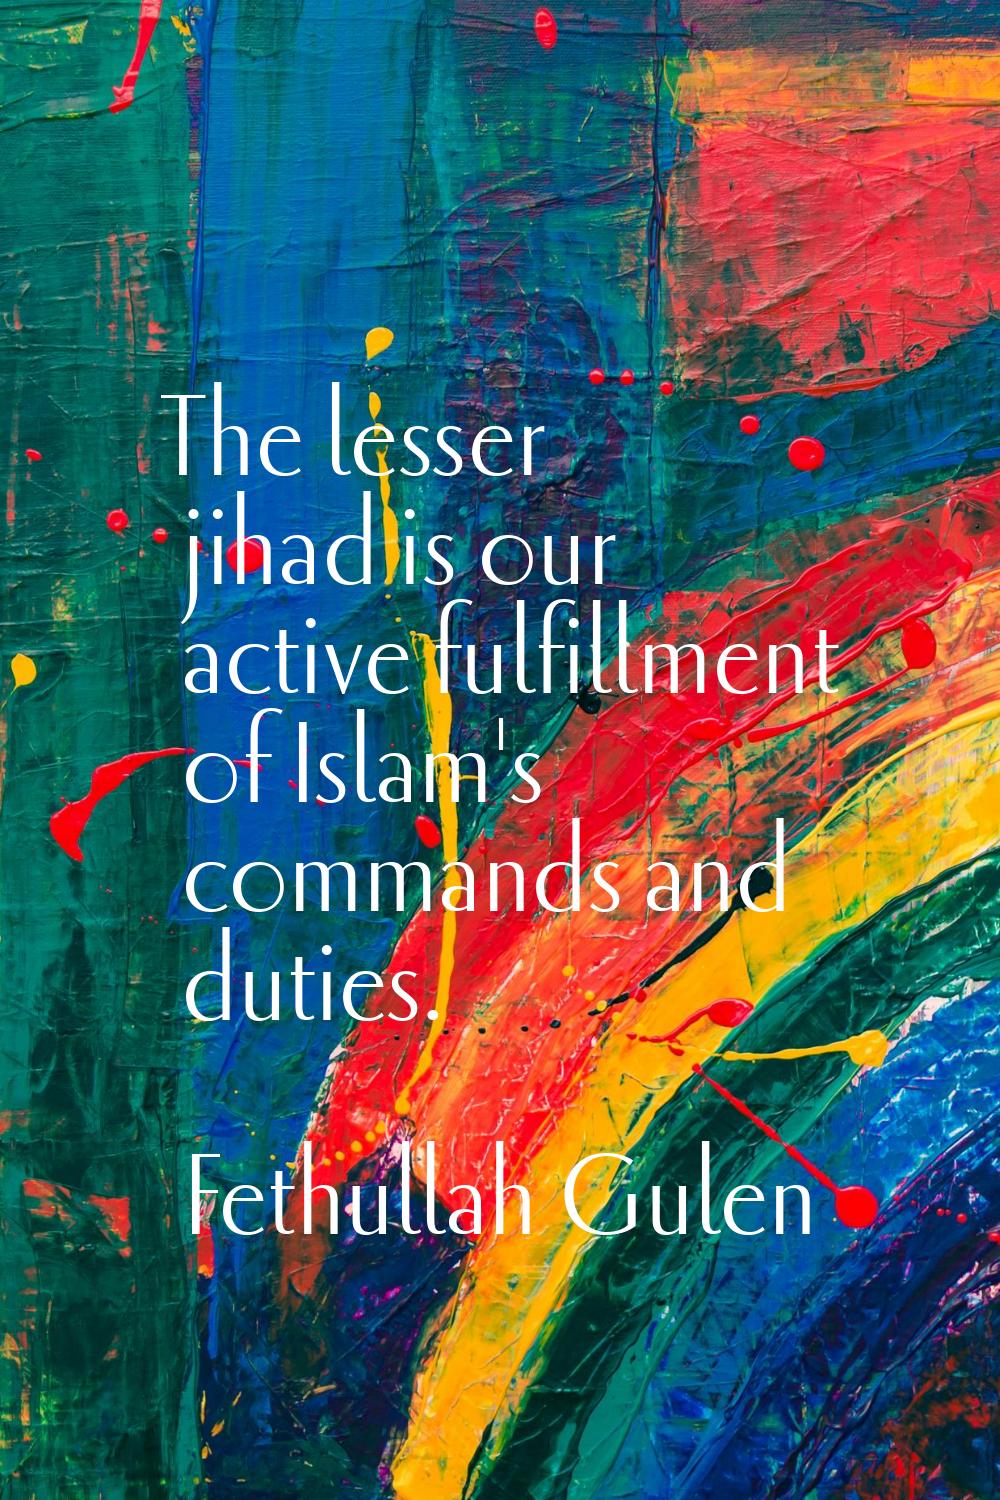 The lesser jihad is our active fulfillment of Islam's commands and duties.